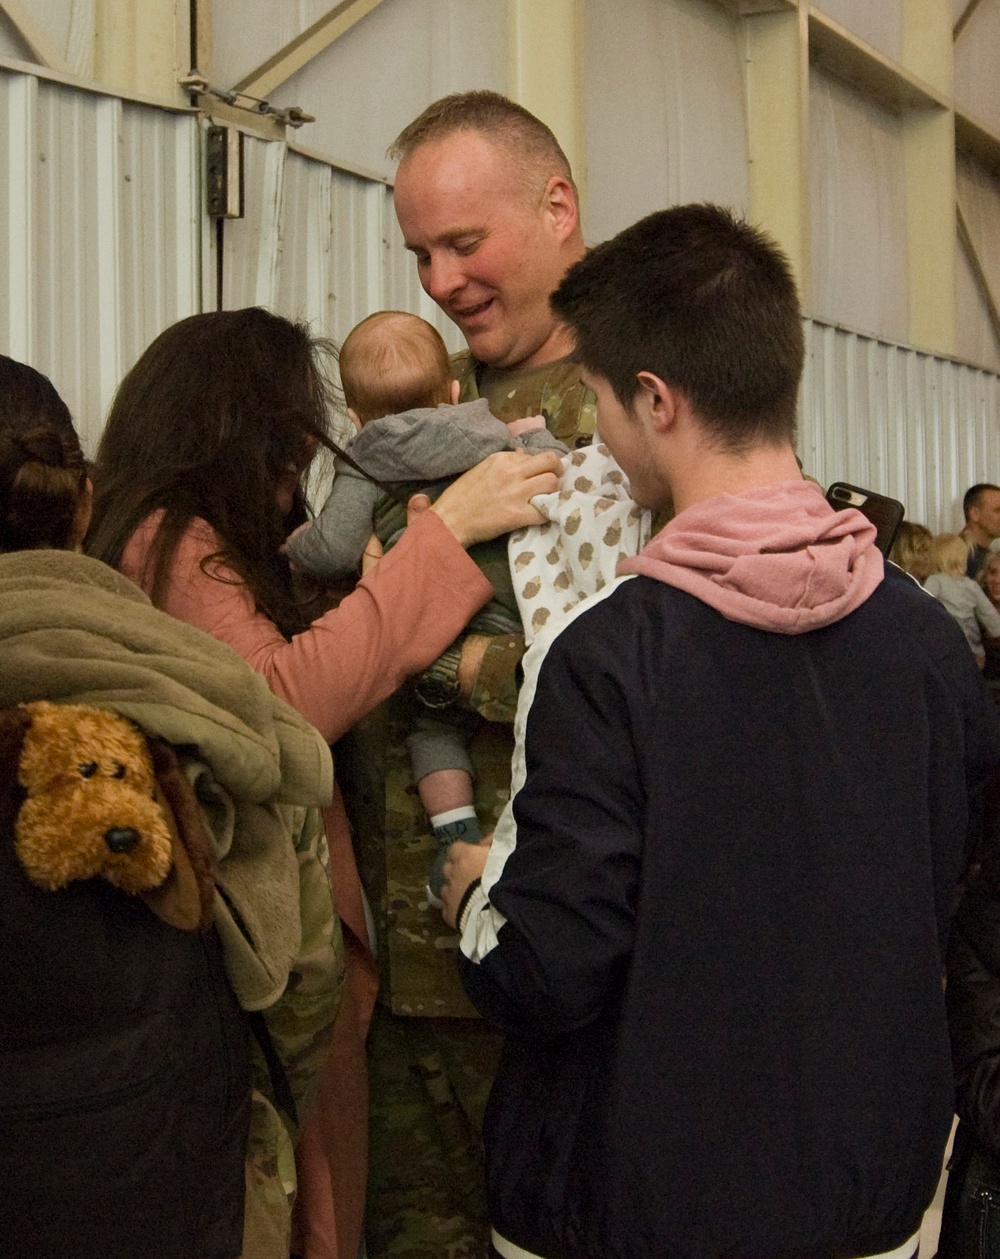 Welcome home dad! It's nice to meet you!